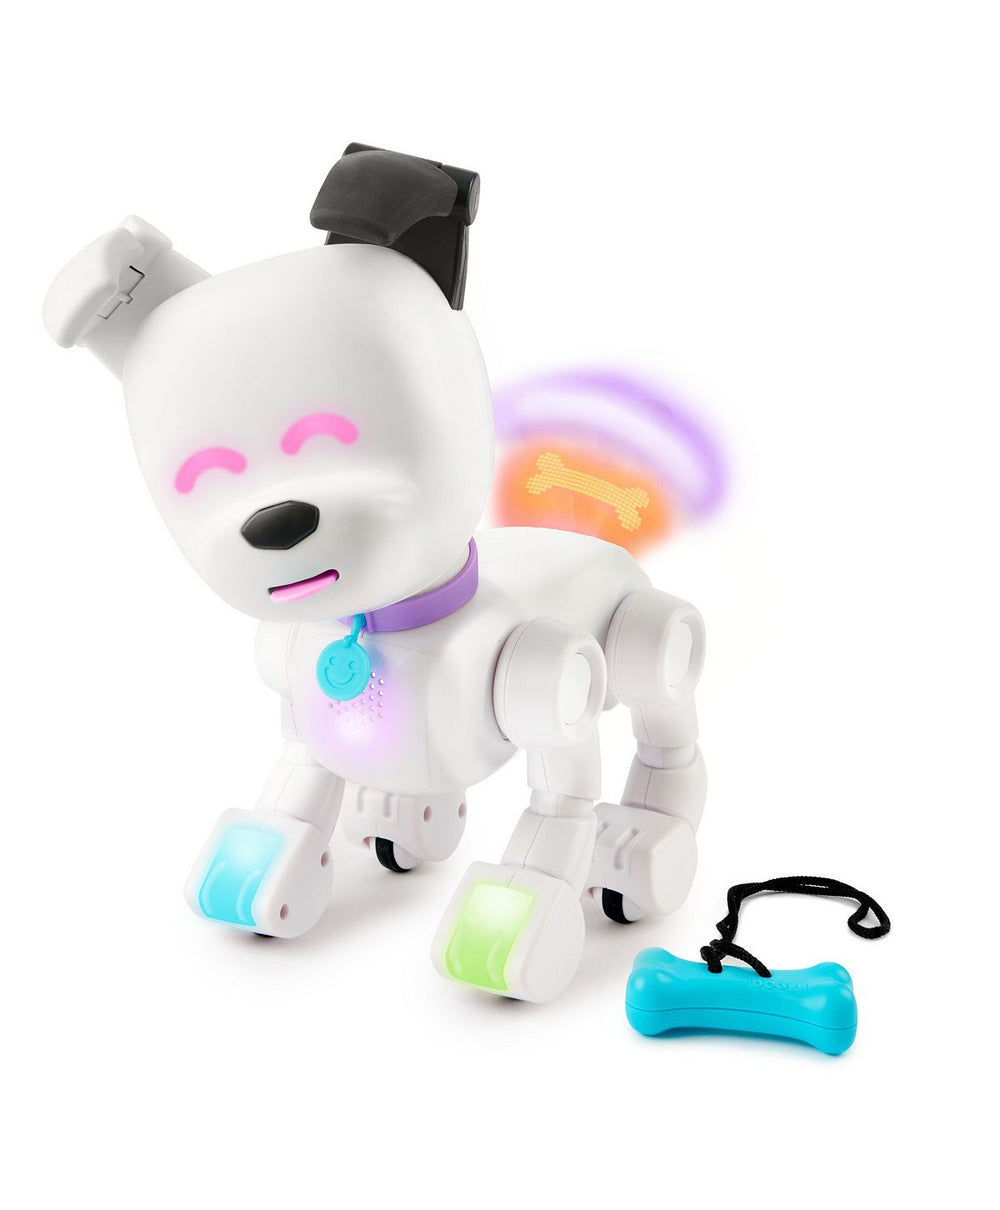 MintID Dog-E Interactive Robot Dog with Unique Personality and POV Tail Communication